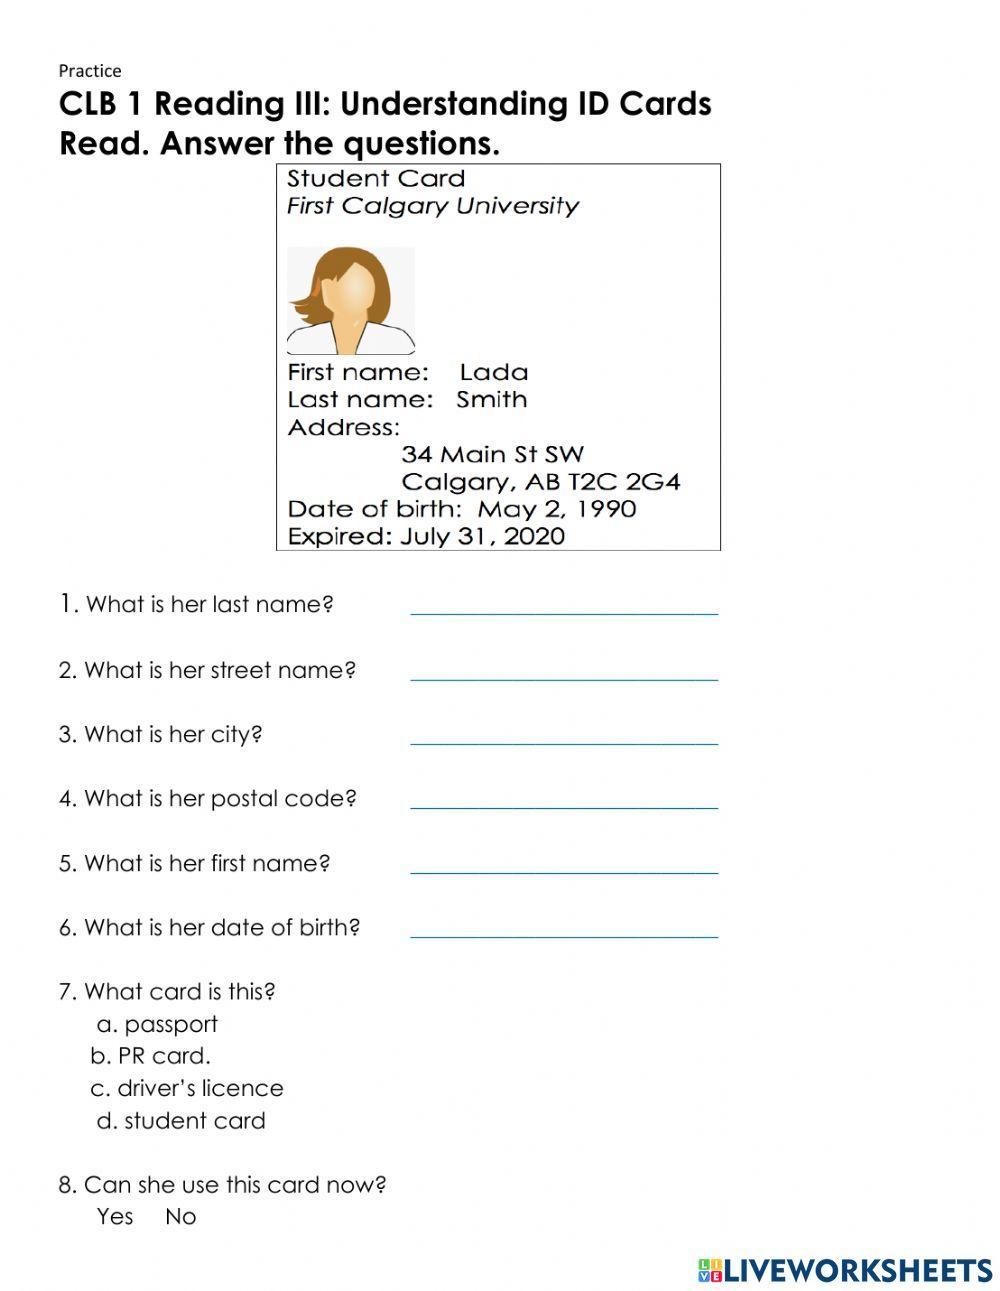 CLB 1 Reading Practice: ID Card